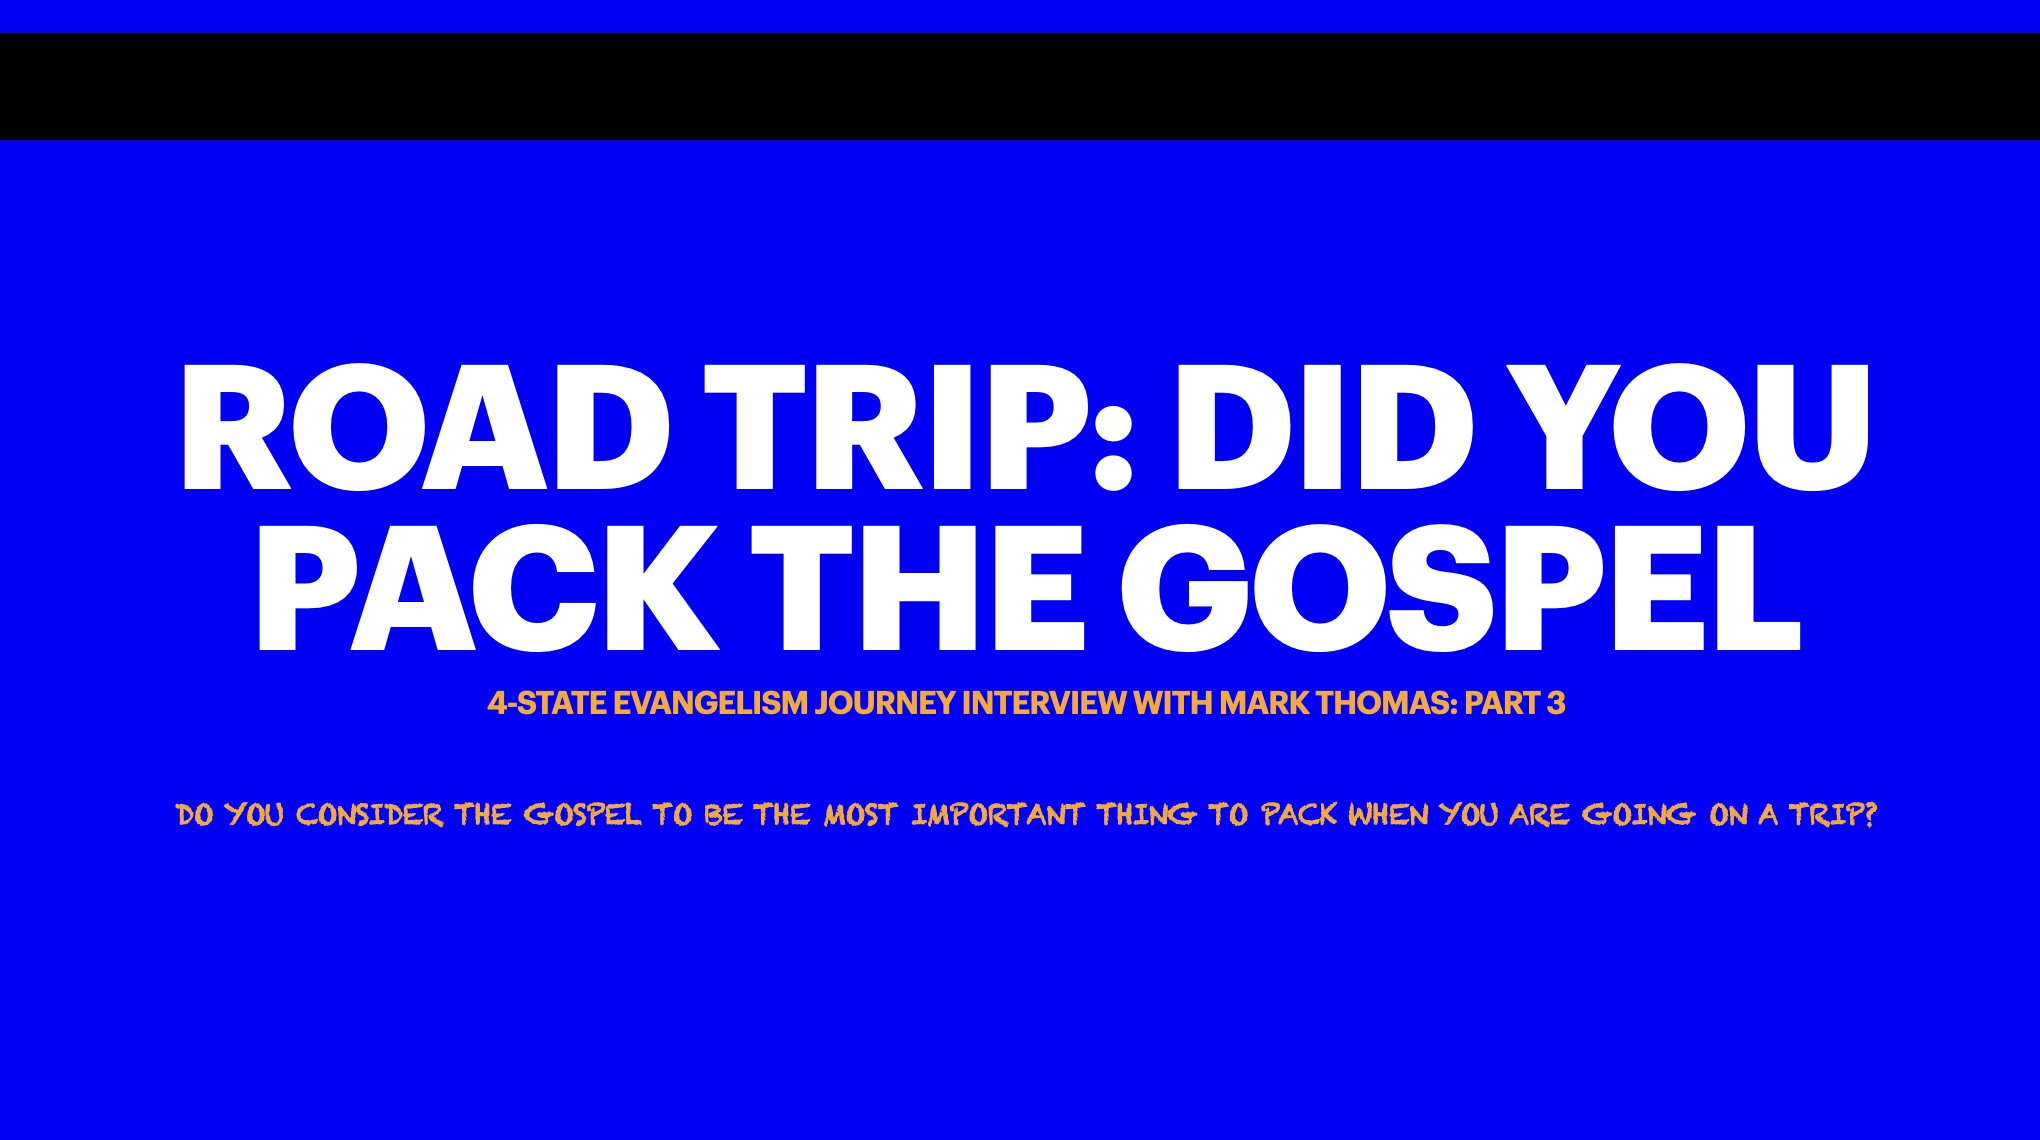 Road Trip: Did you pack the Gospel?, with Mark Thomas - Part 3